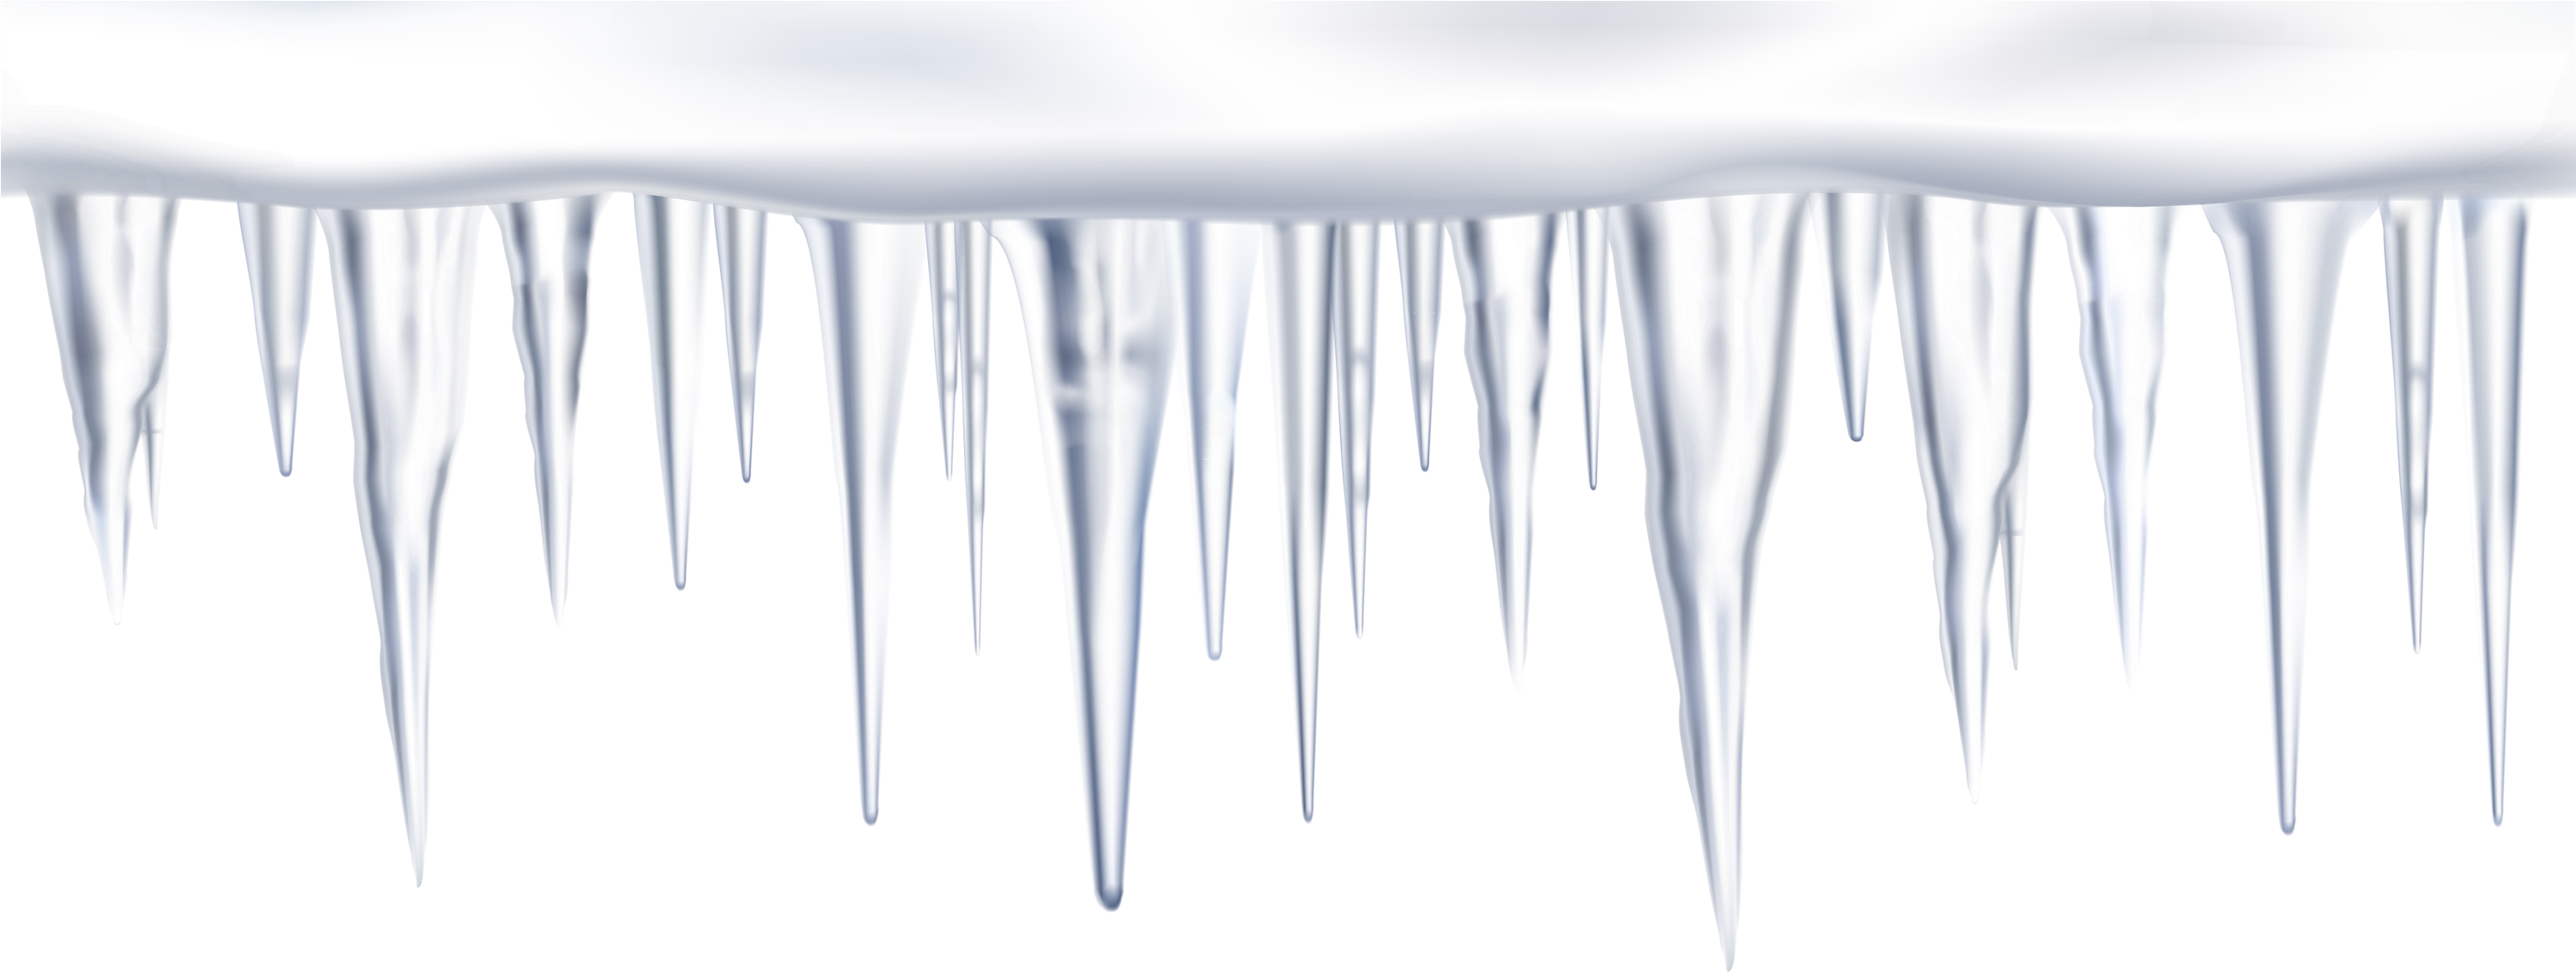 Icicles Download Png Image Transparent Background Winter Icicles